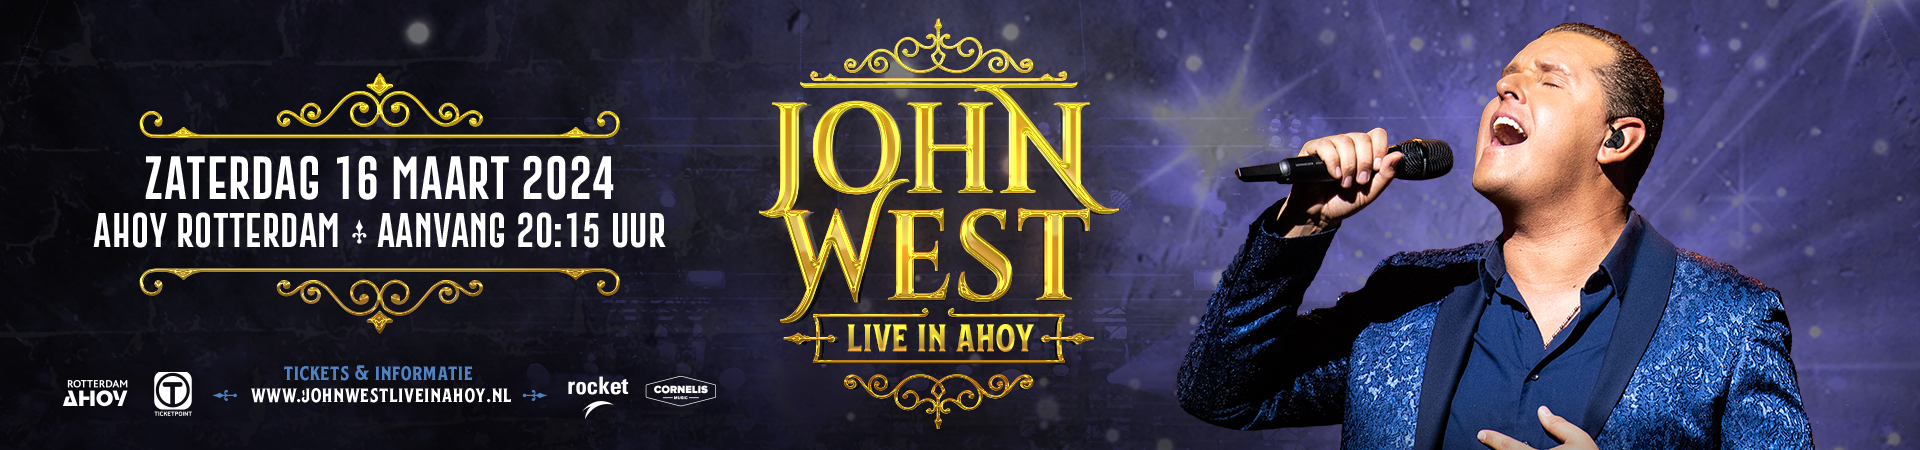 John West Live in Ahoy 2024 tickets